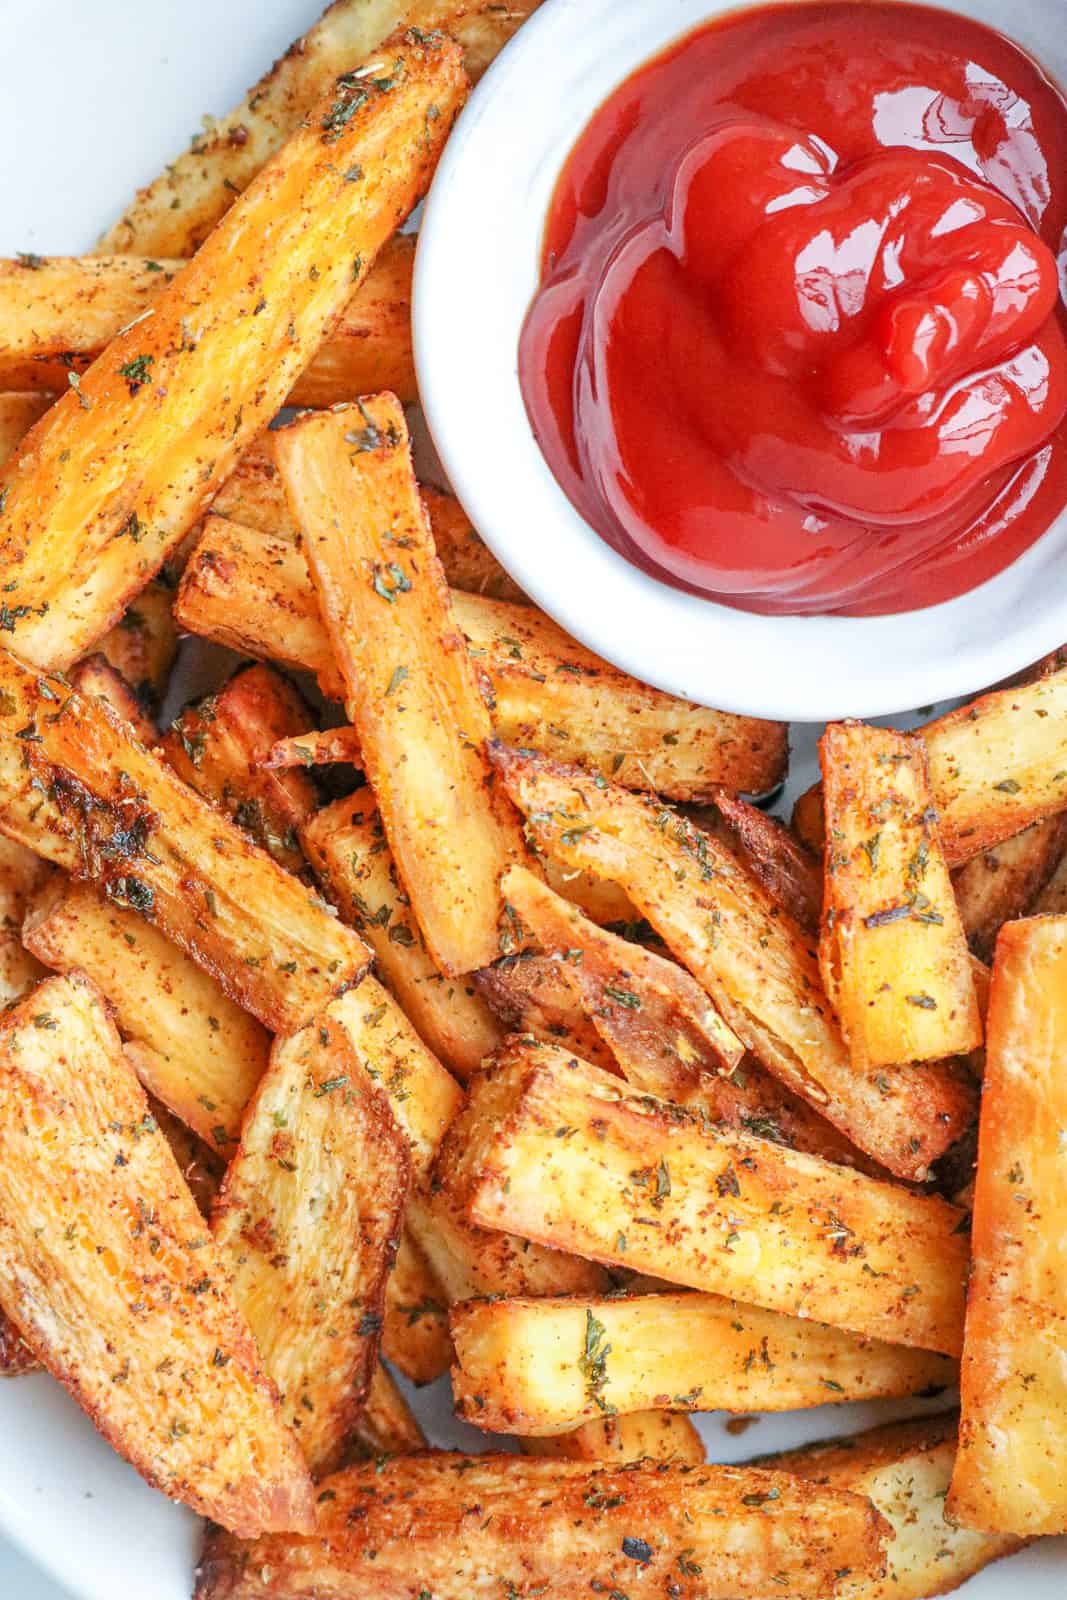 Cassava Fries with ketchup